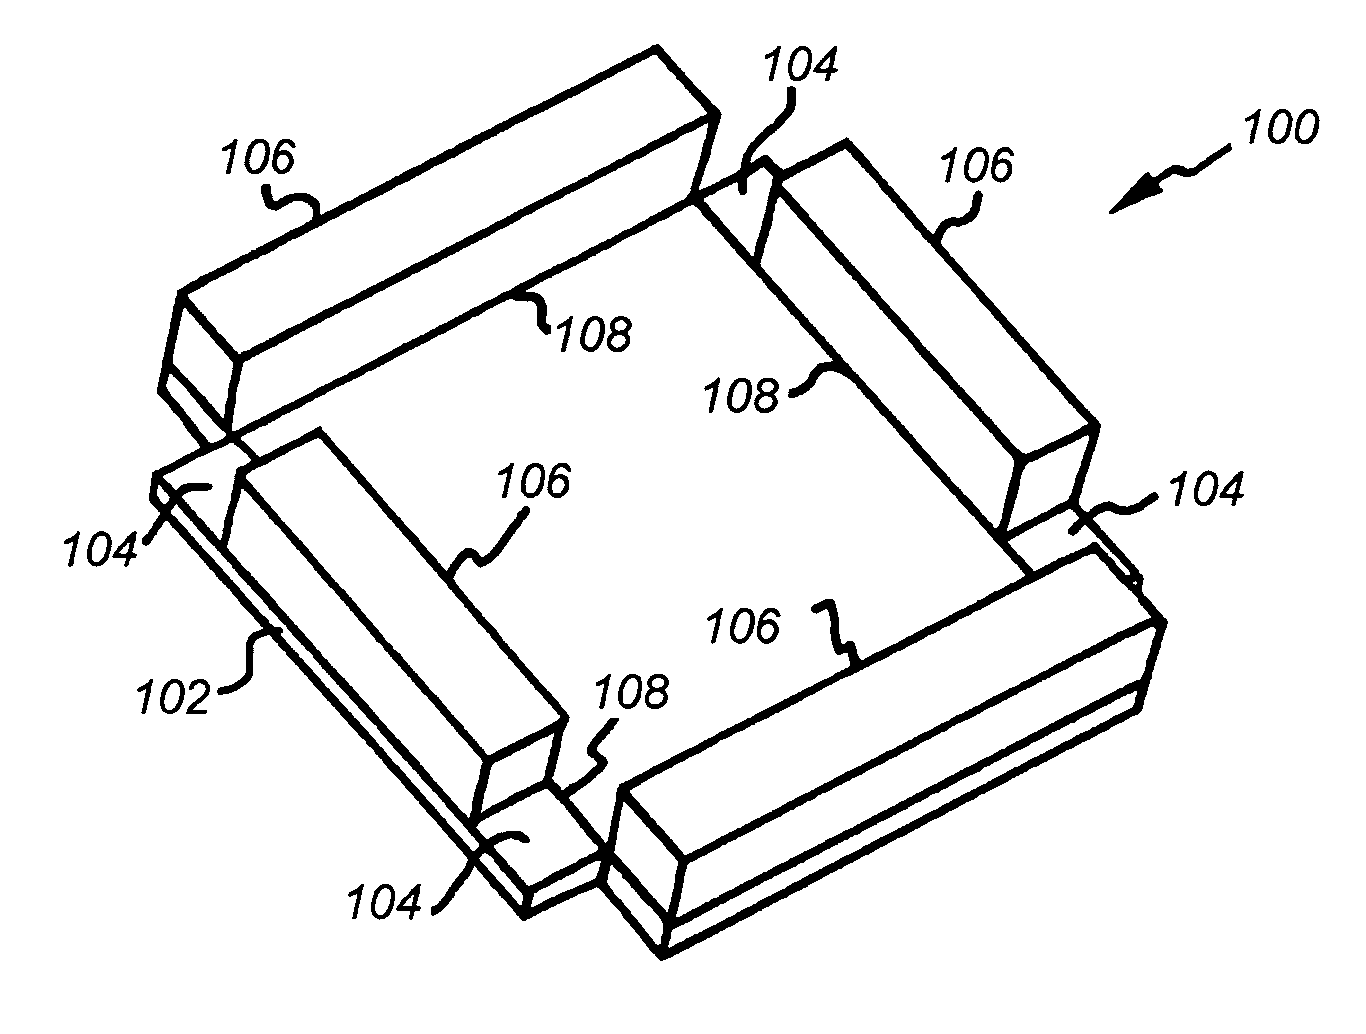 Hinged foam assembly for mattress manufacturing